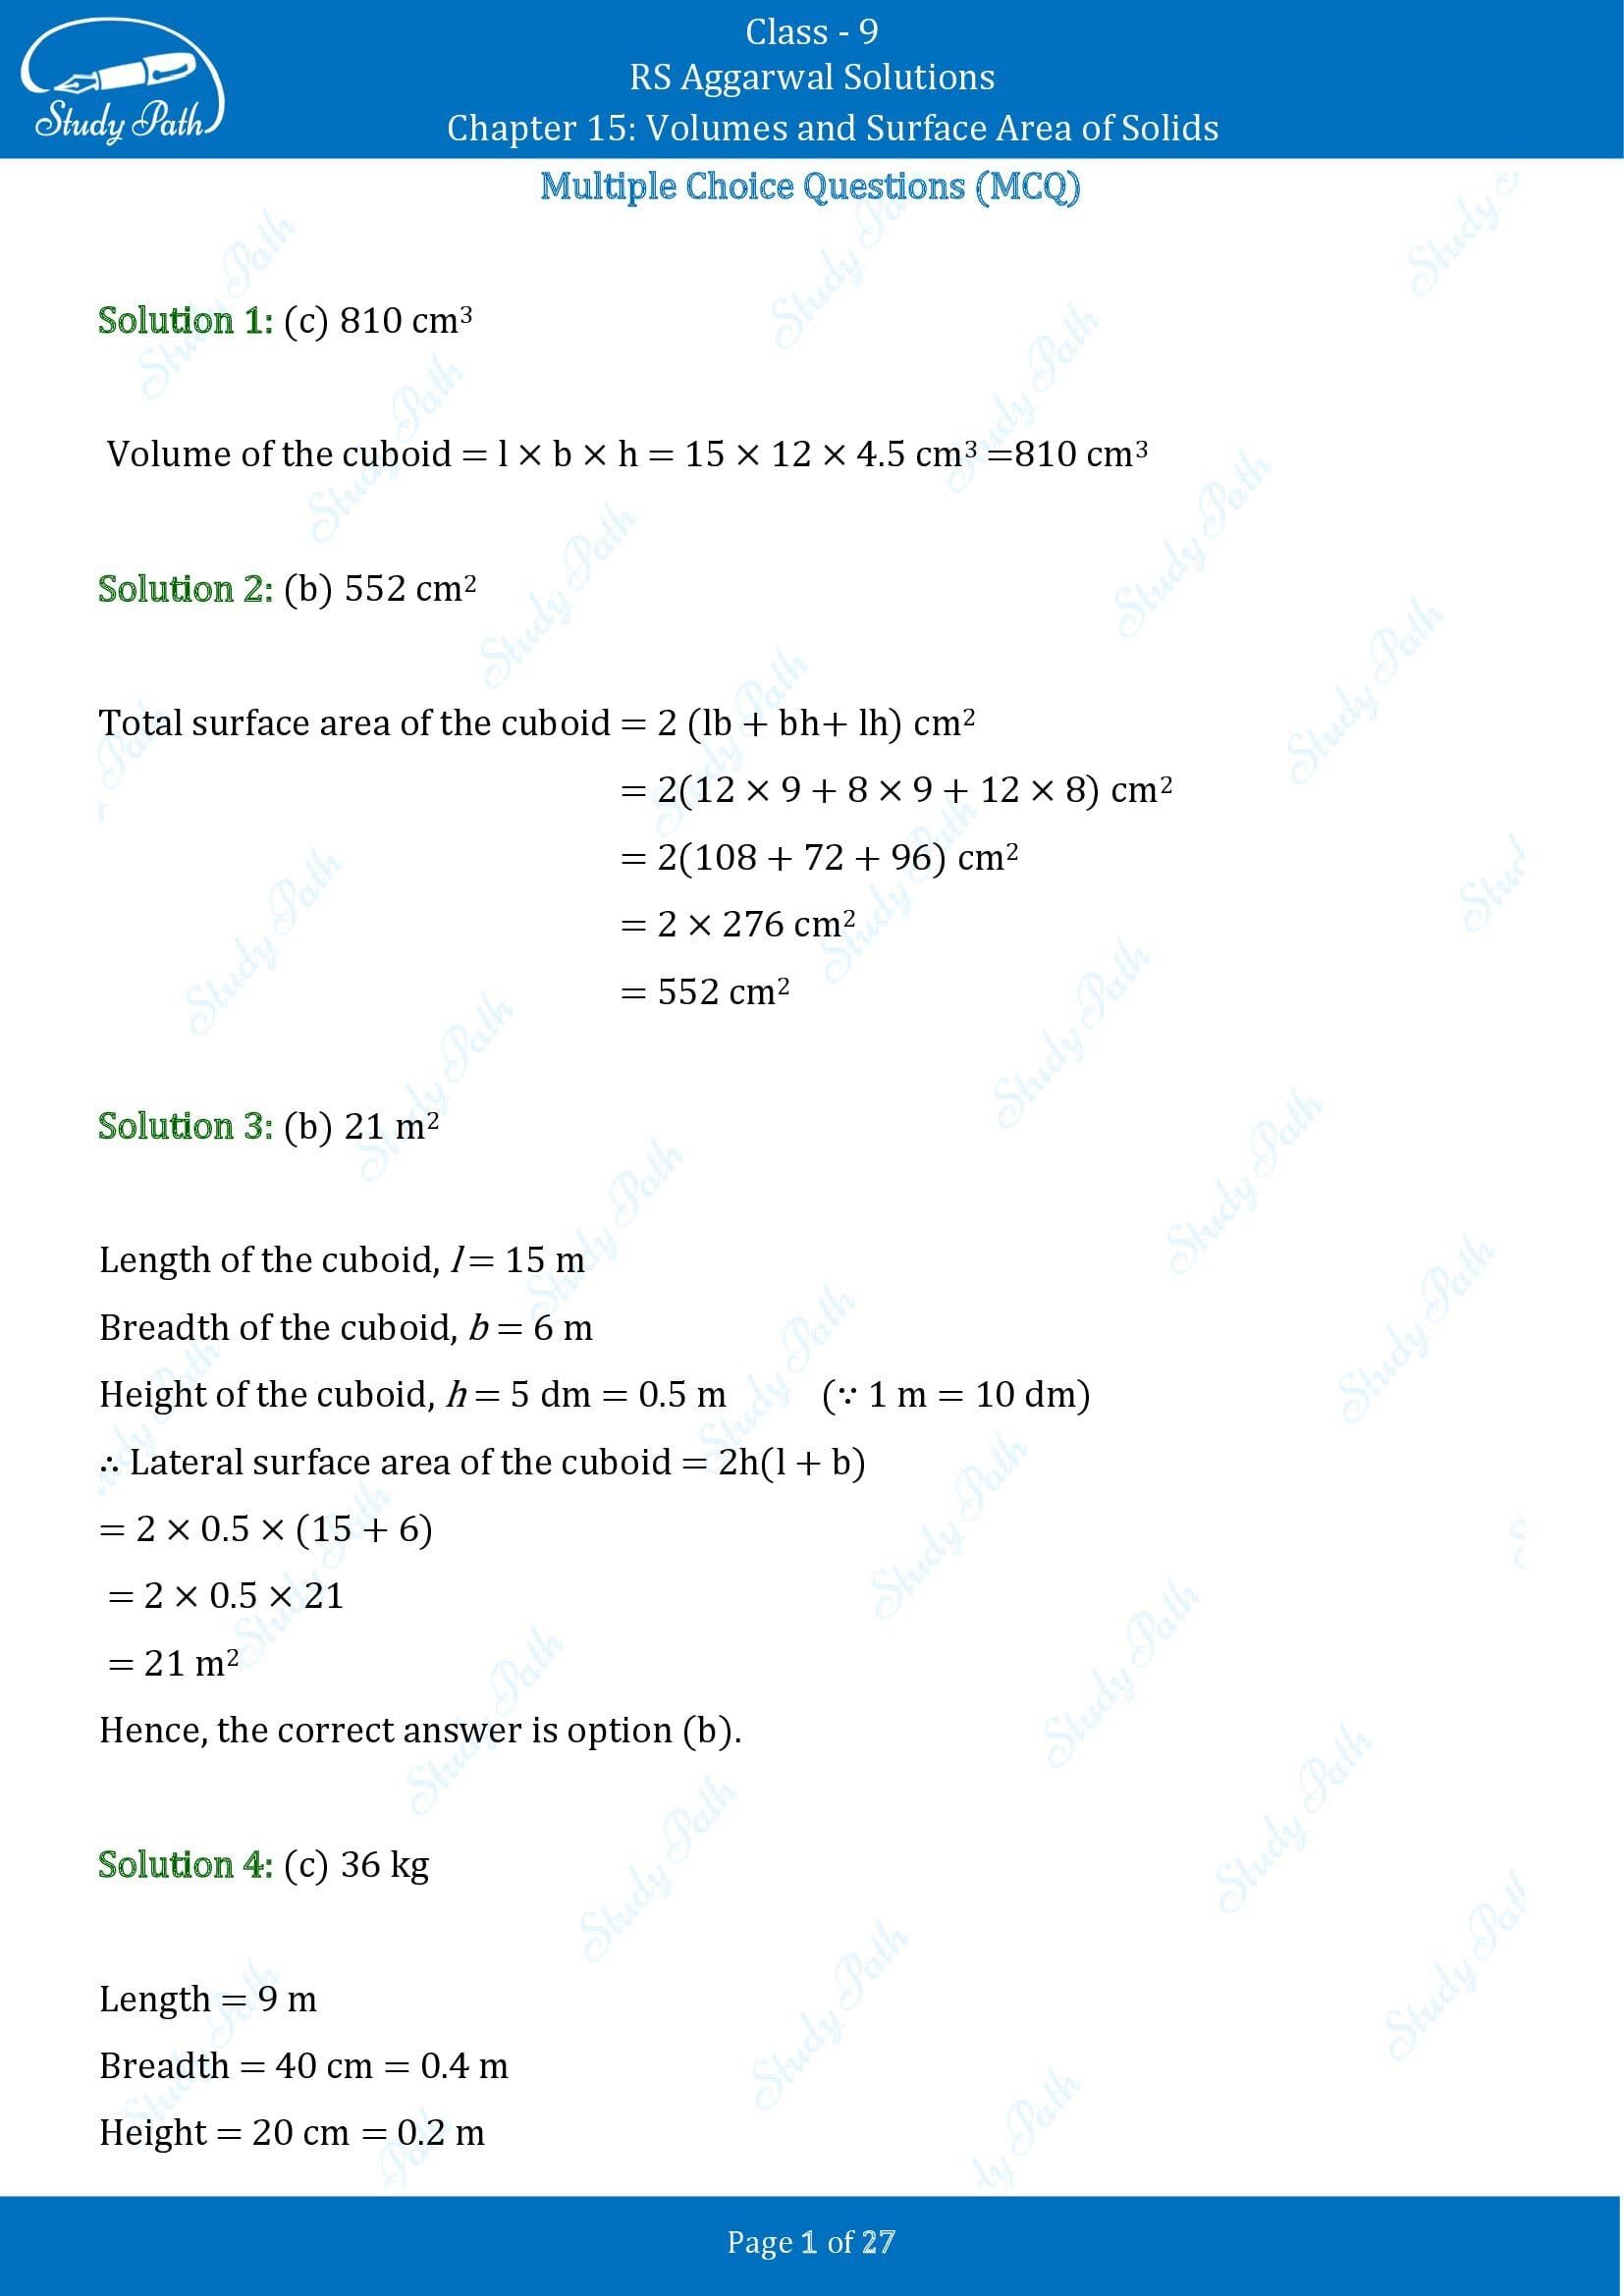 RS Aggarwal Solutions Class 9 Chapter 15 Volumes and Surface Area of Solids Multiple Choice Questions MCQs 00001